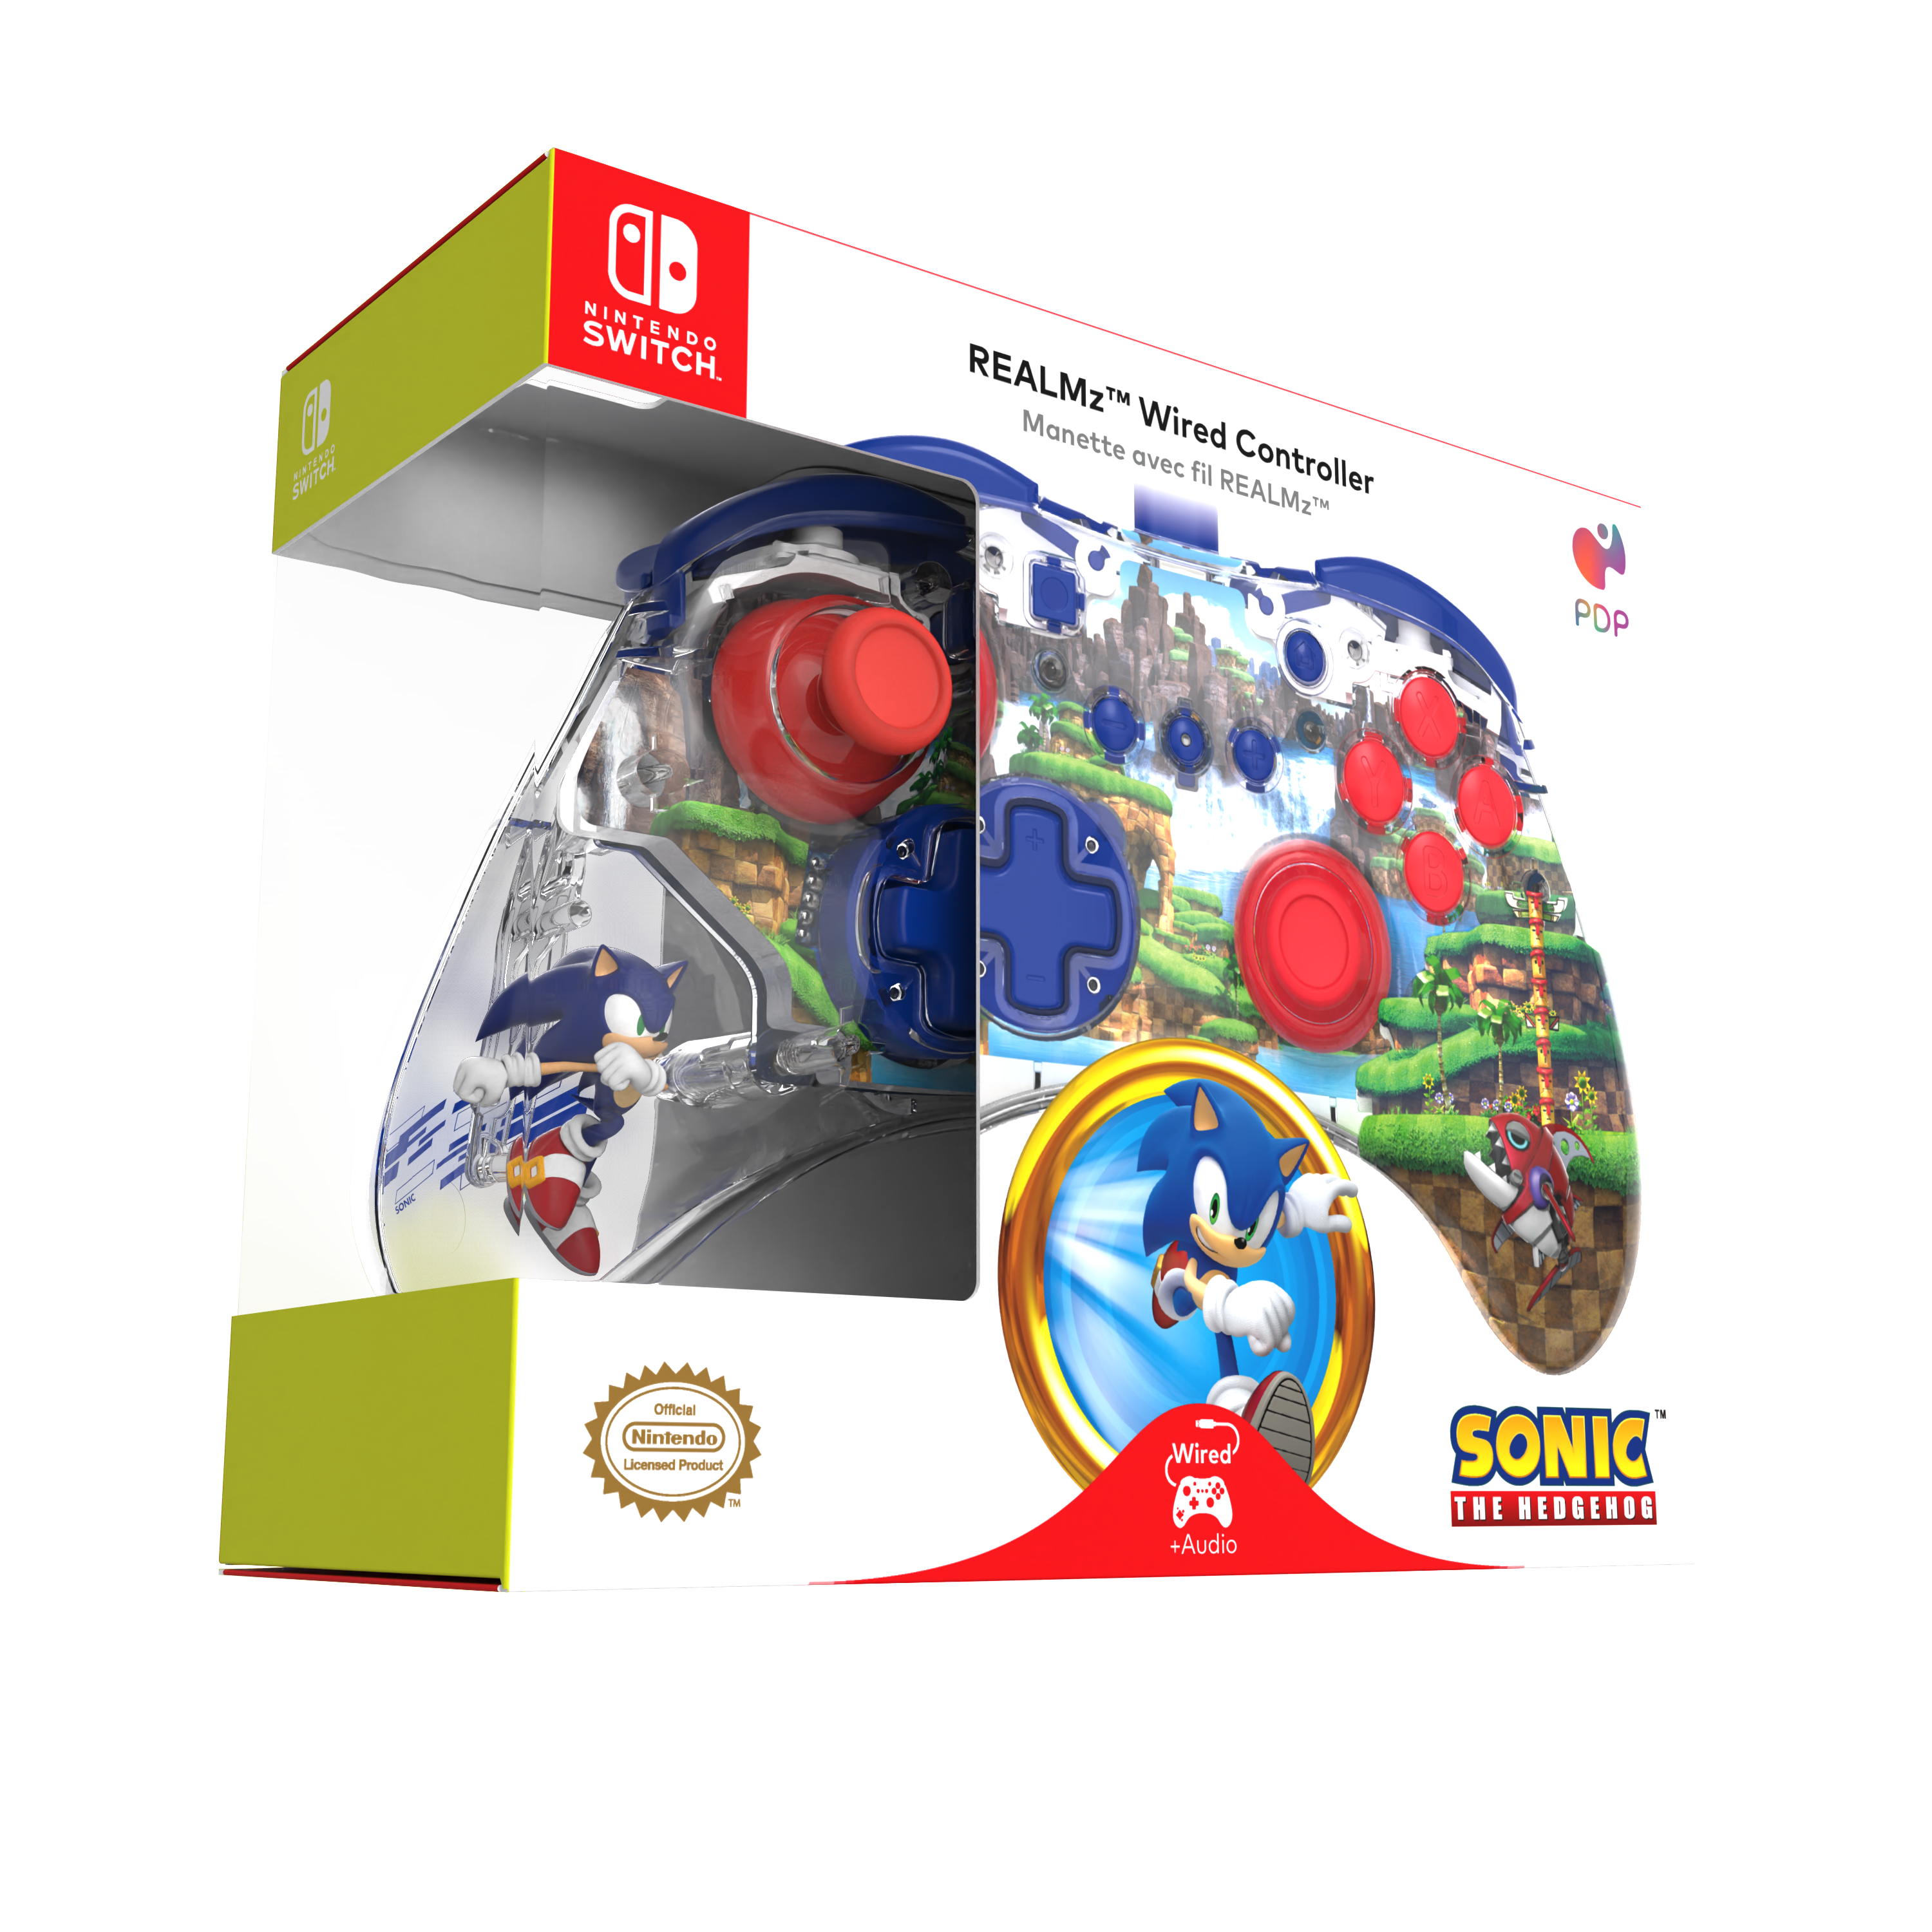 Pdp Realmz Wireless Controller For Nintendo Switch - Sonic : Target